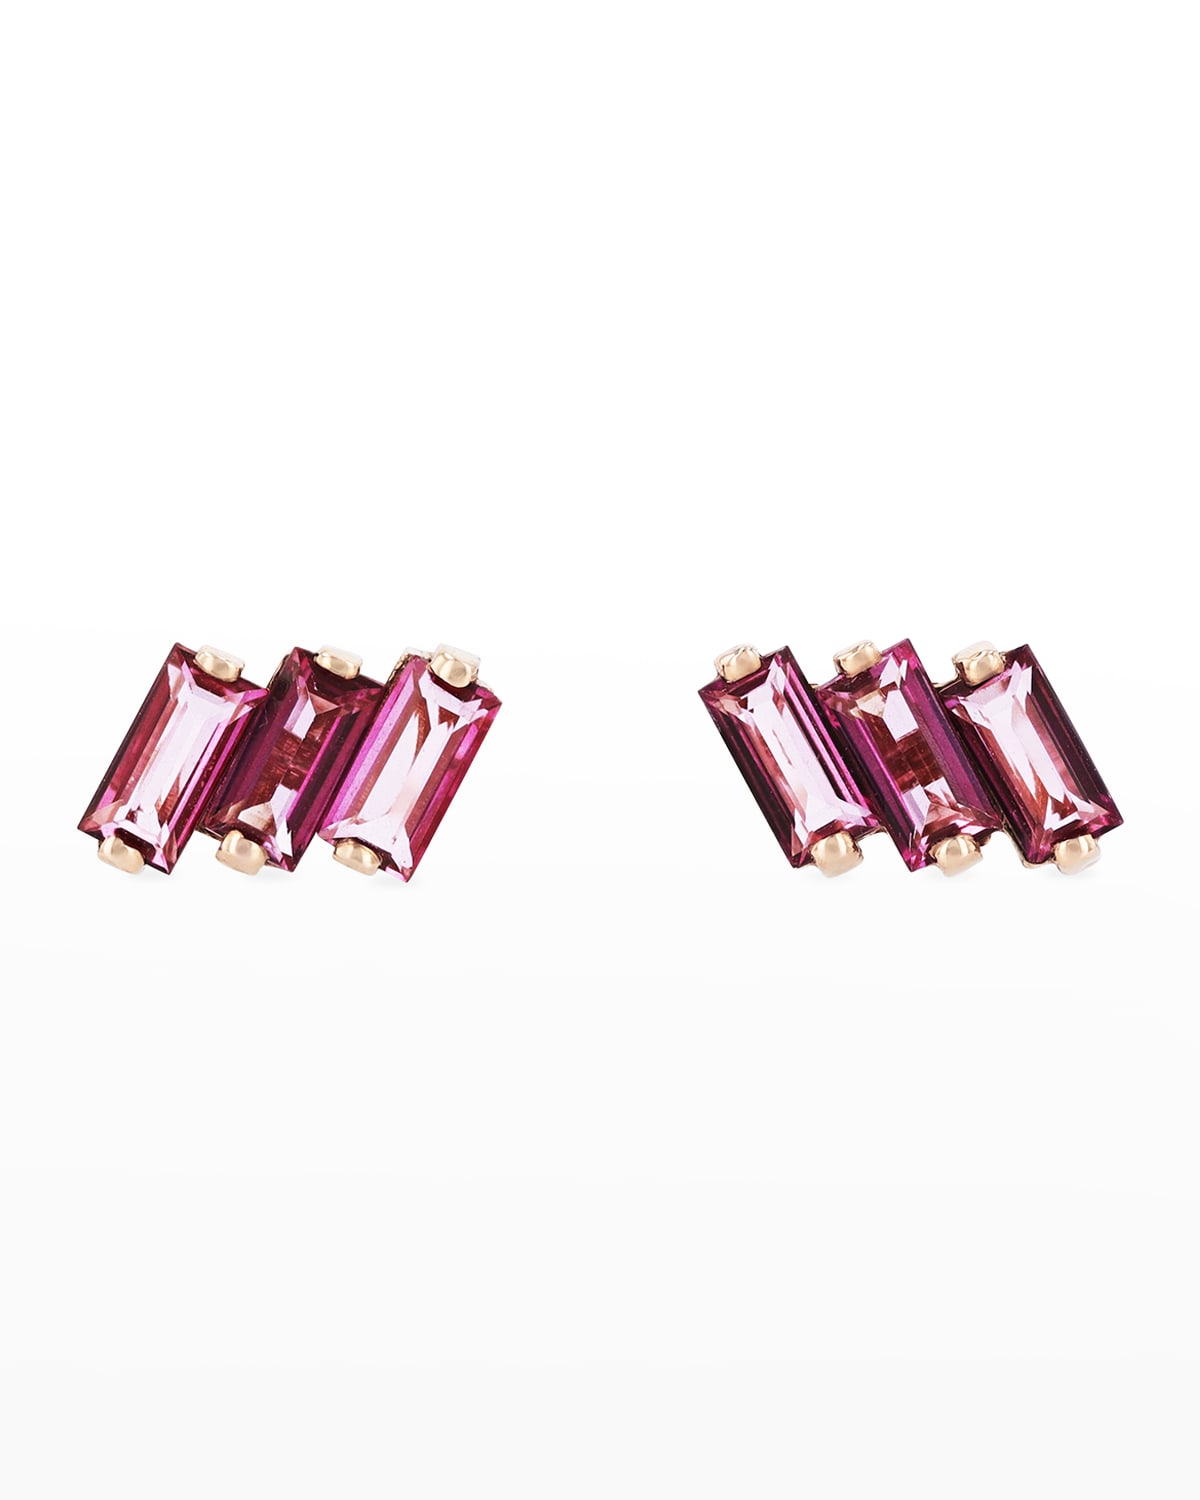 14K Rose Gold Three Baguette Earrings with Baguette-Cut Pink Topaz